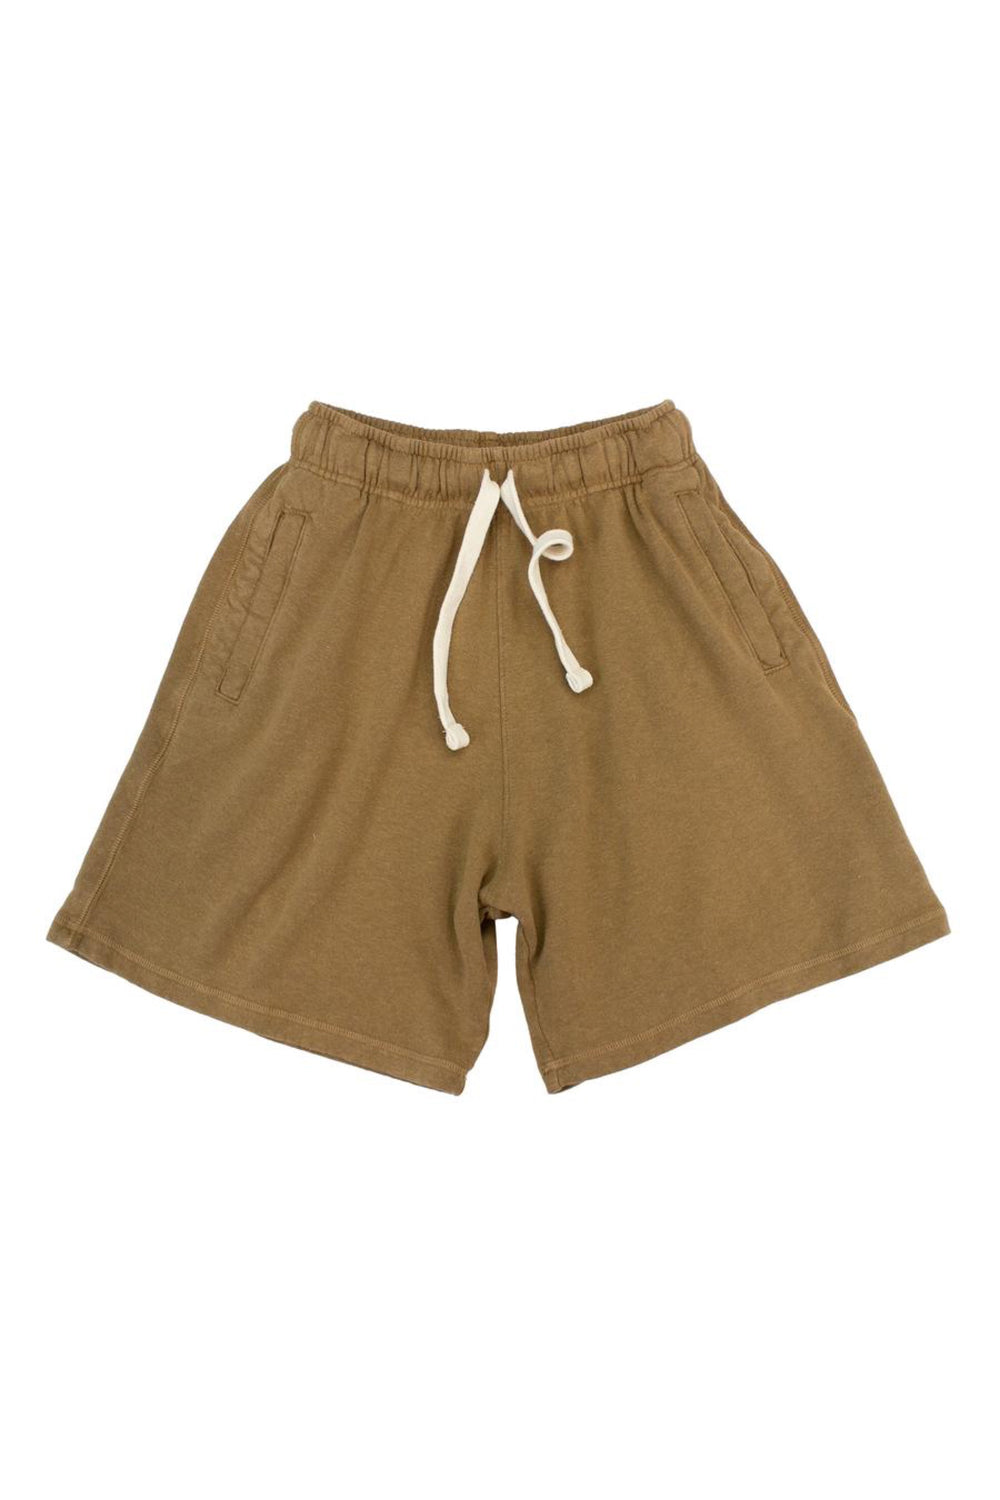 Coyote Sport Shorts